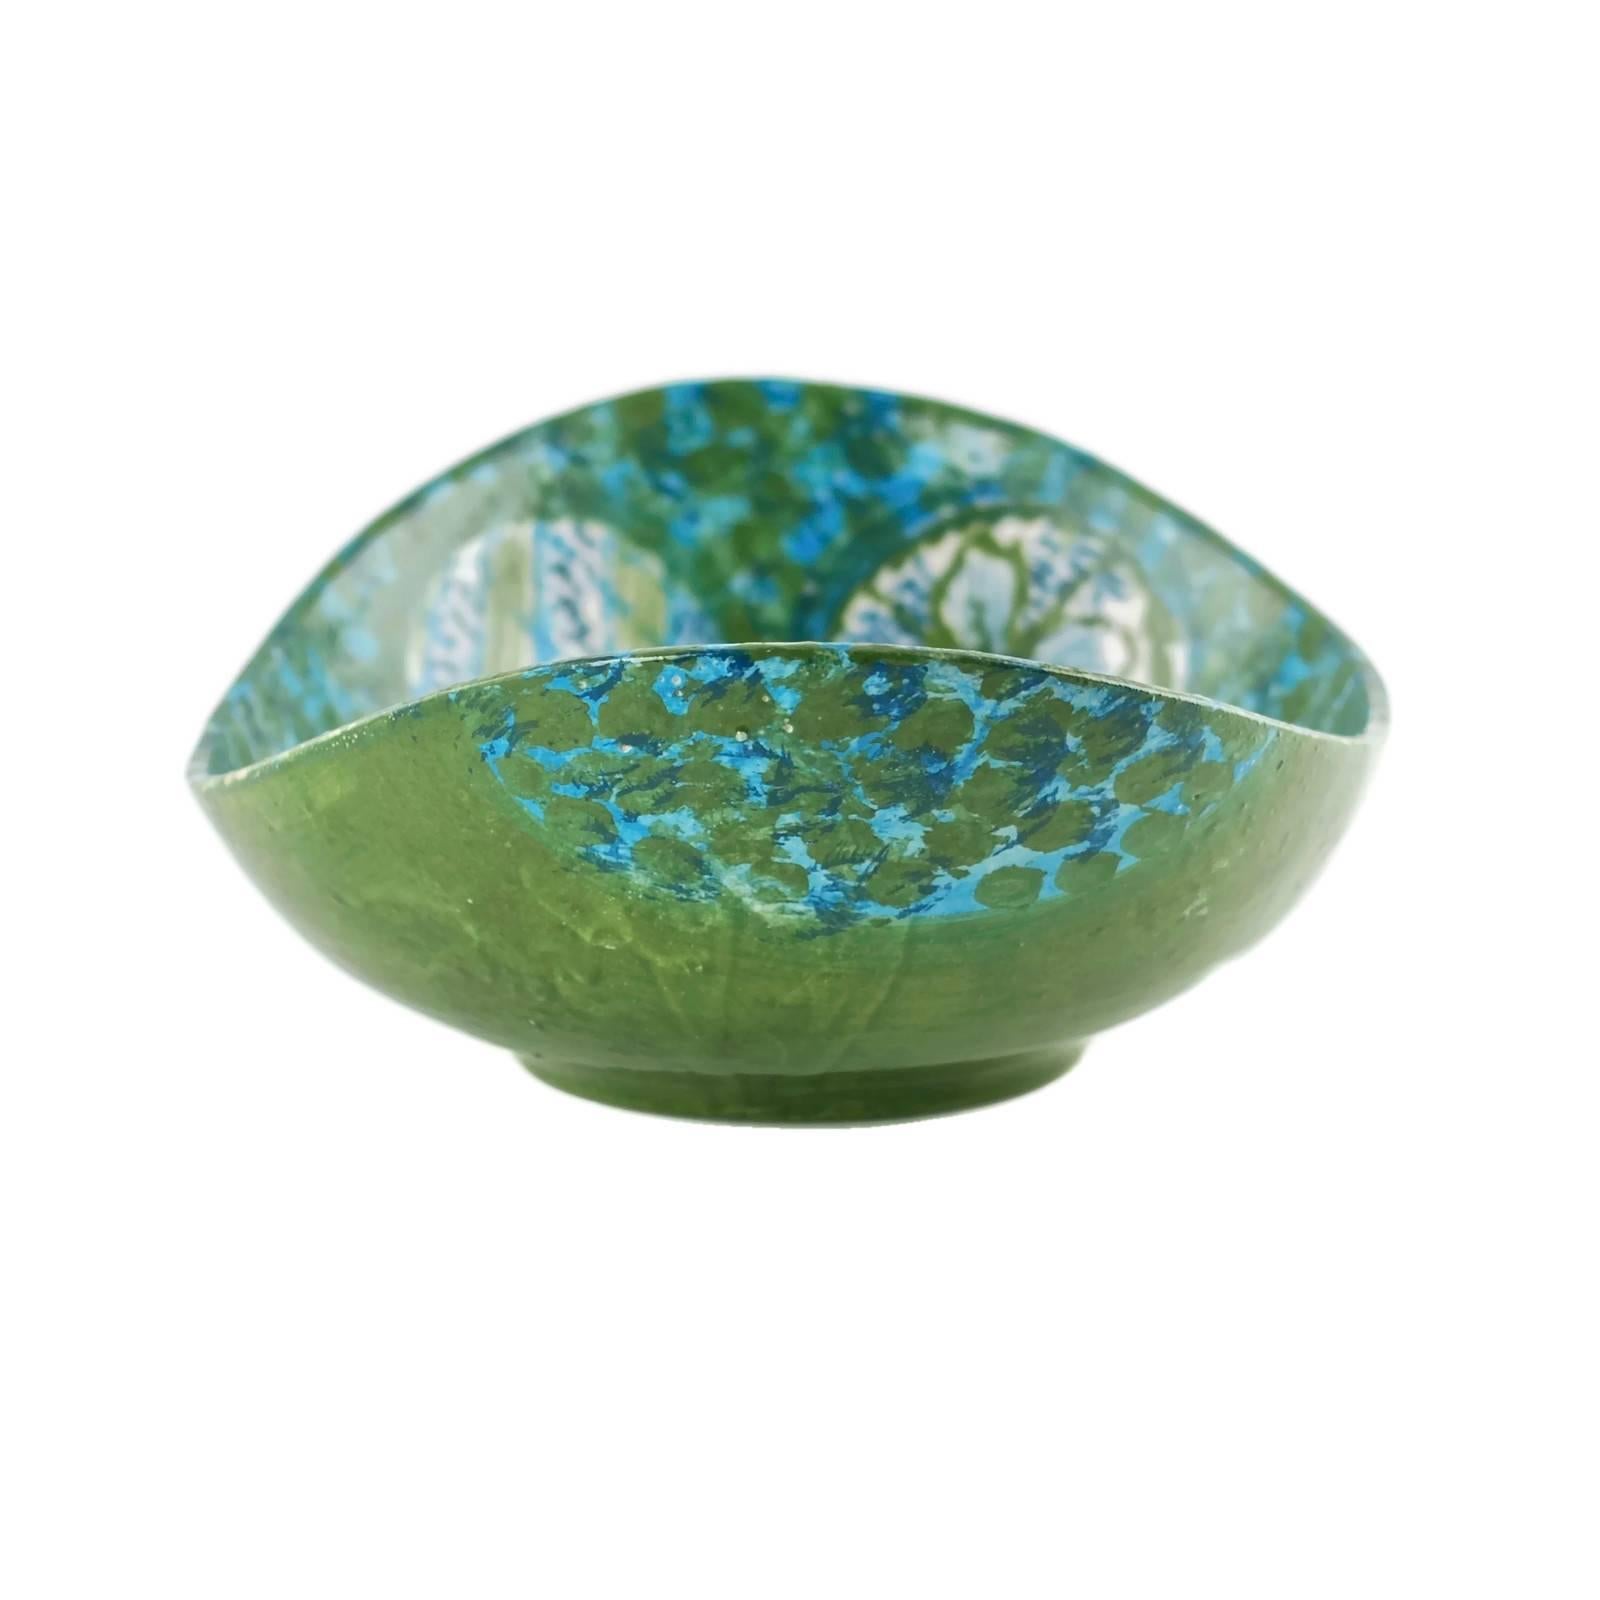 Midcentury Raymor Hand-Painted Italian Ceramic Centerpiece Bowl In Good Condition For Sale In Cincinnati, OH